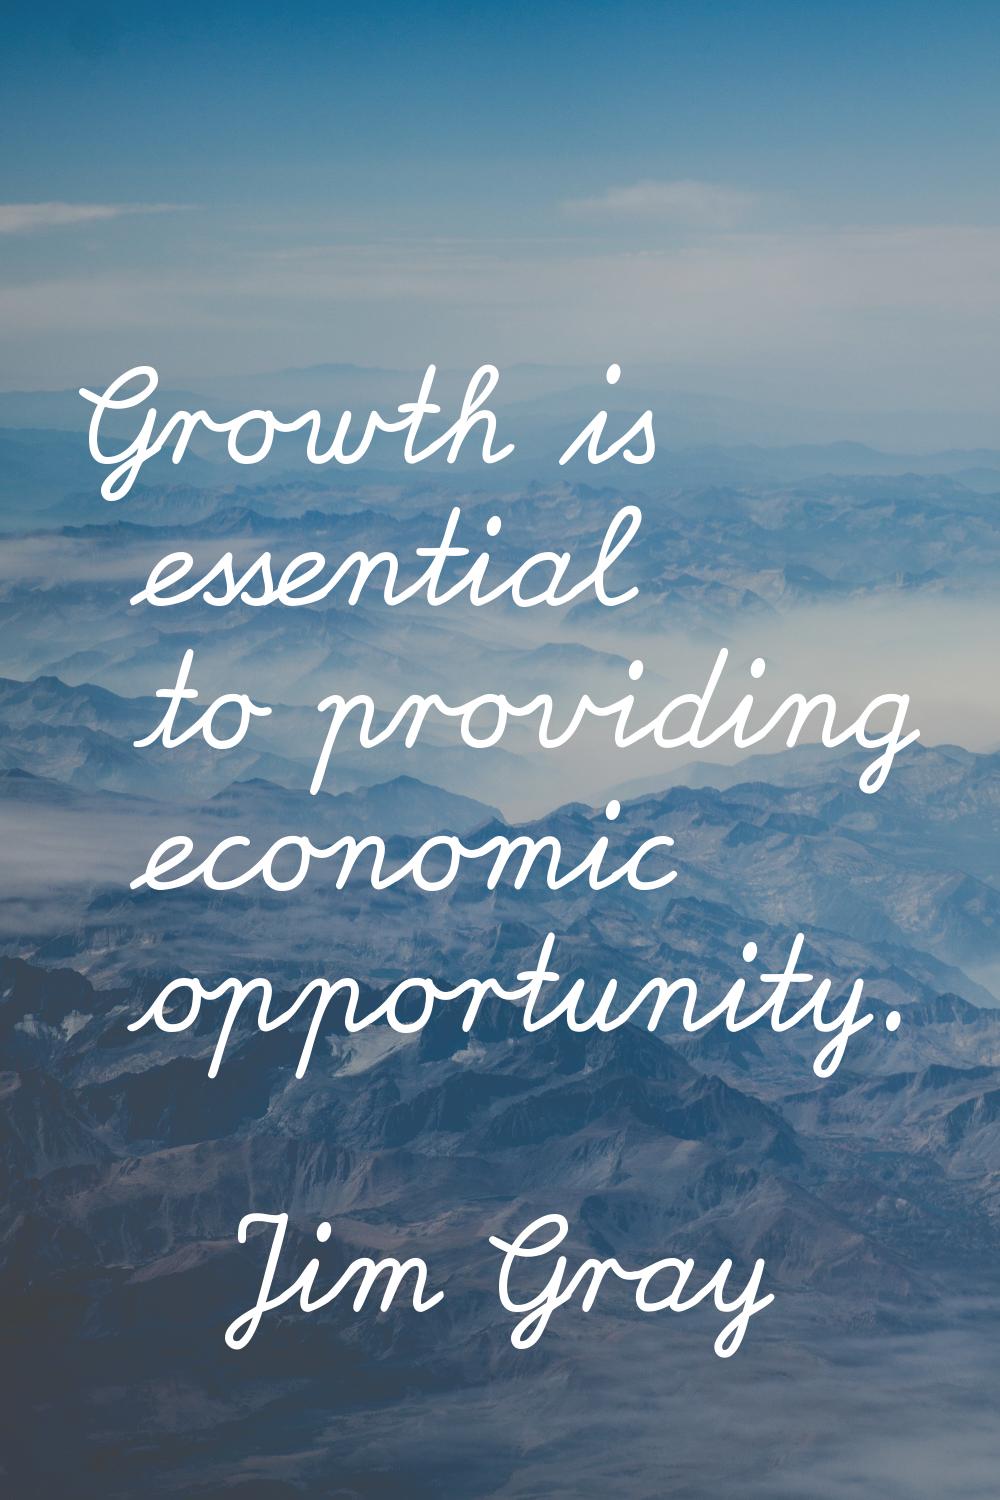 Growth is essential to providing economic opportunity.